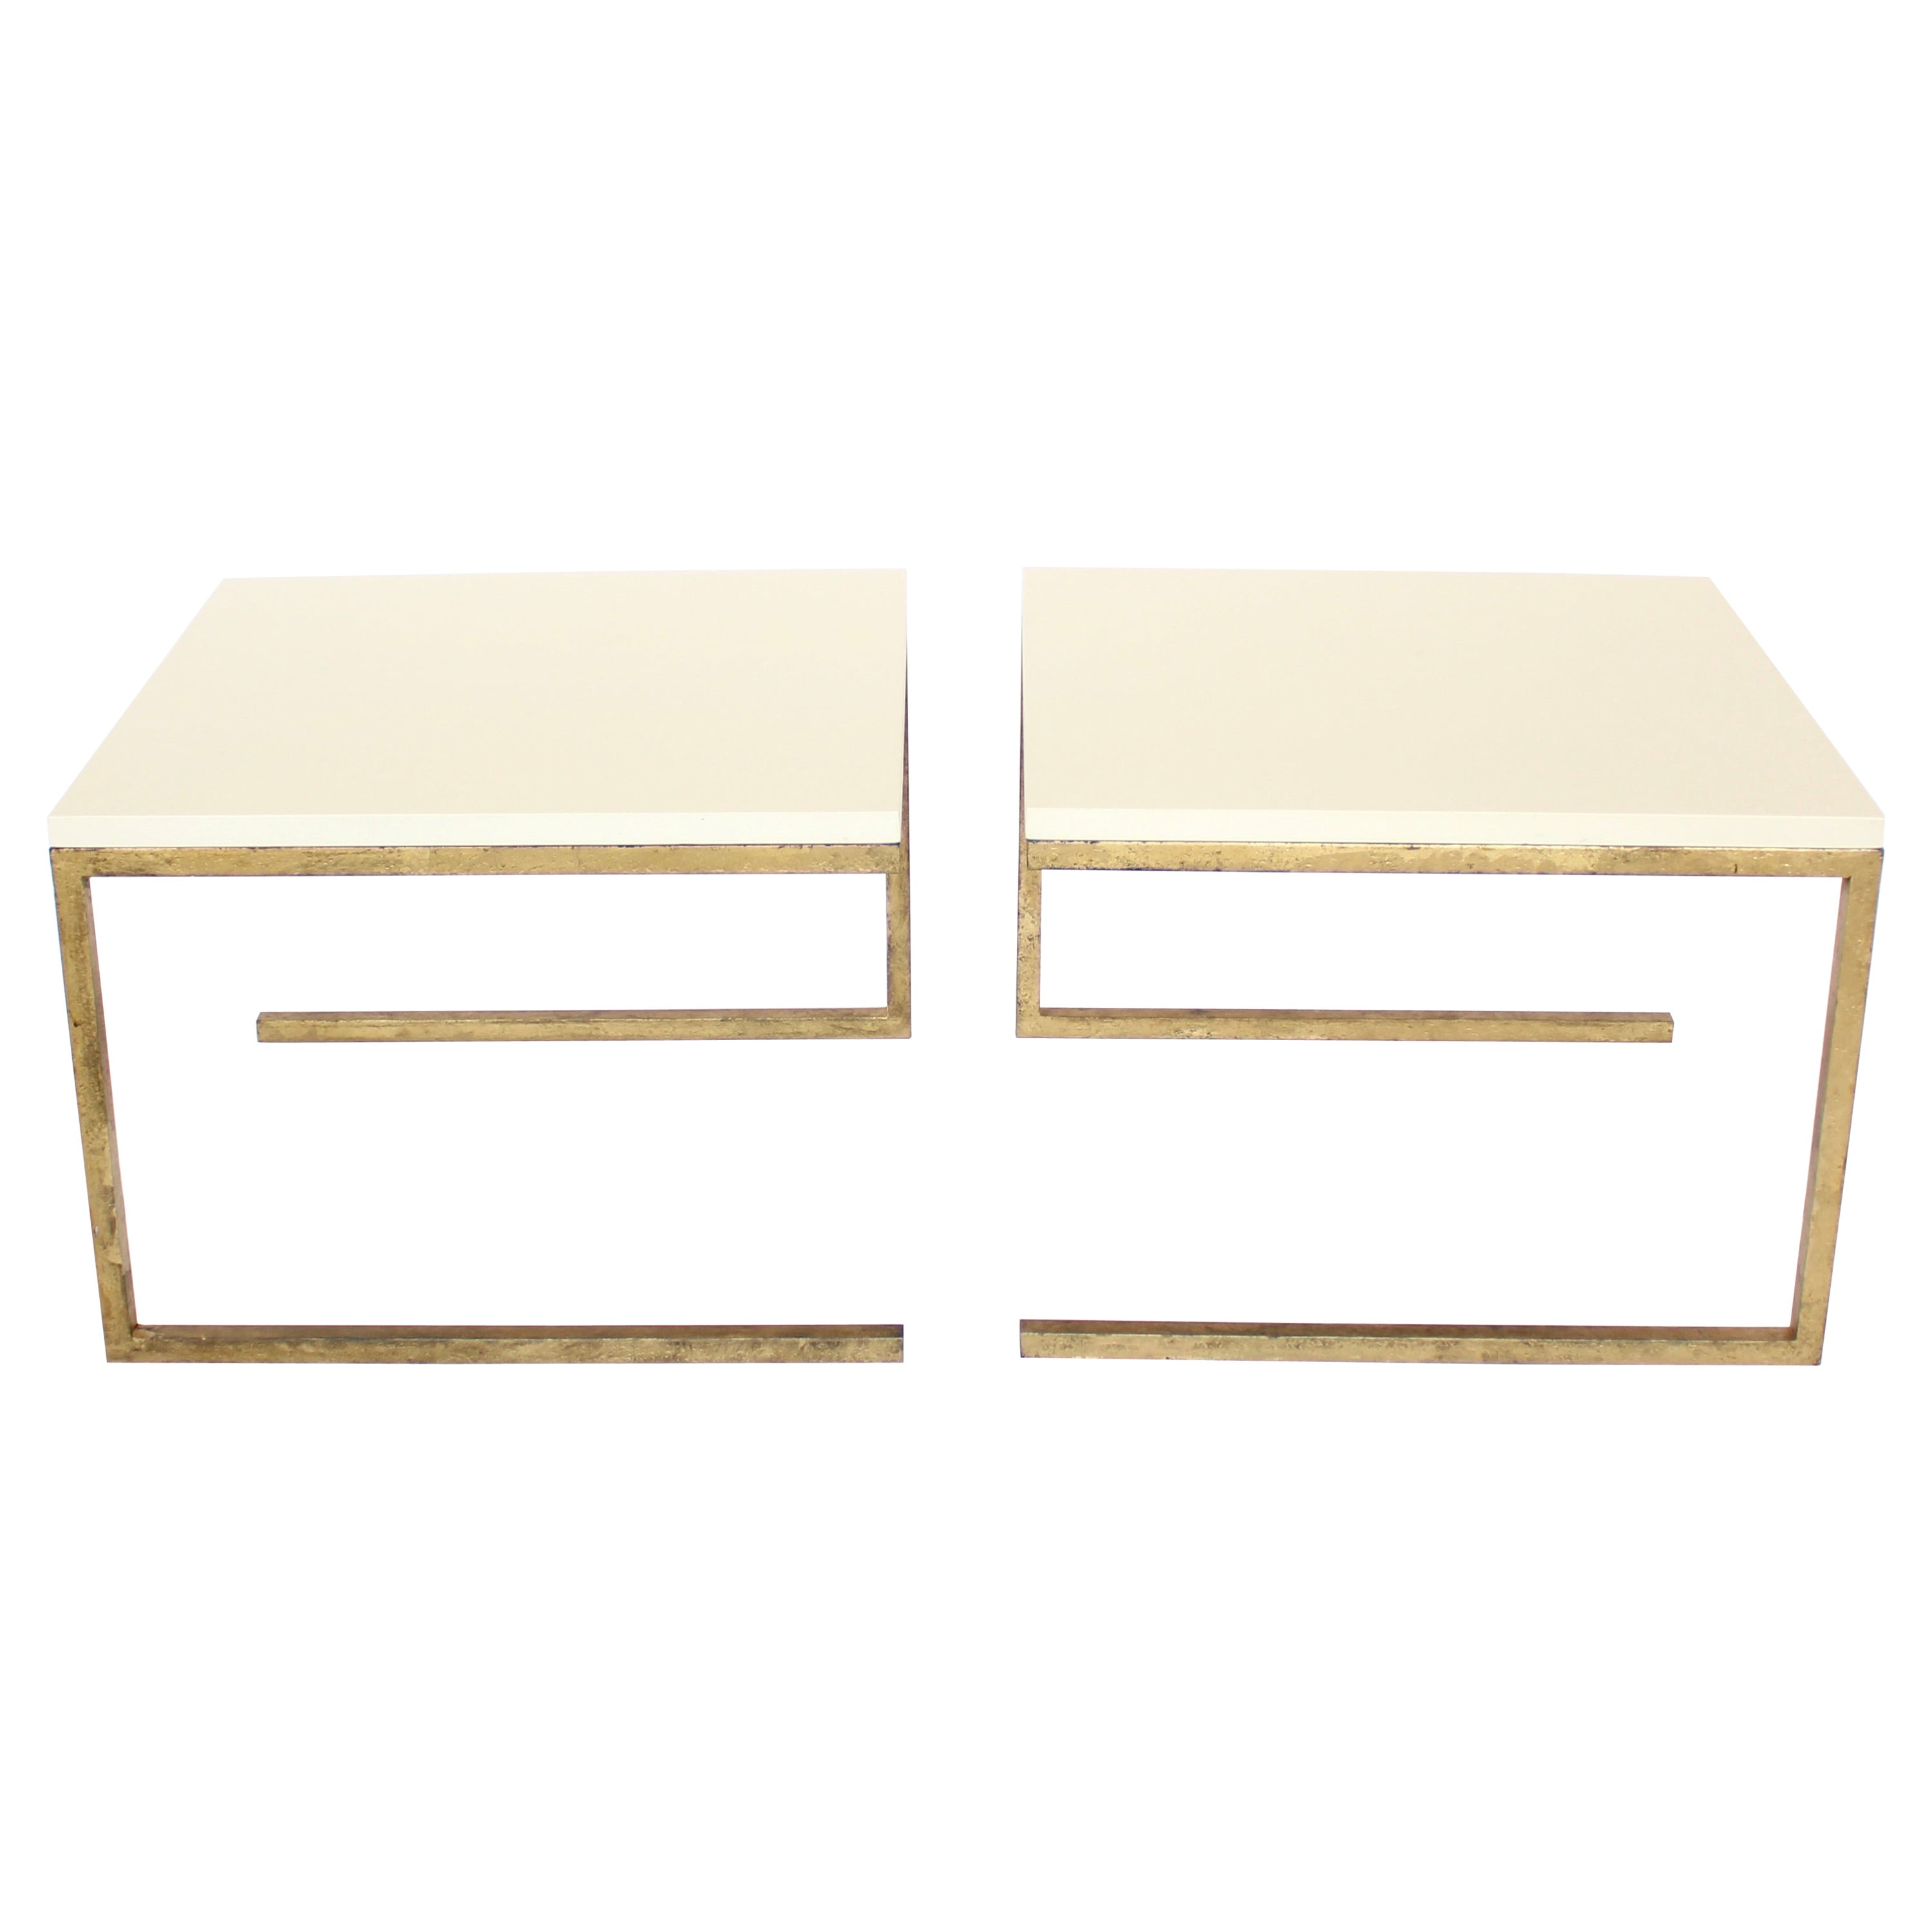 Maison Ramsay Side Tables Pair of Cream Lacquered Top Gilded Iron Frame Work